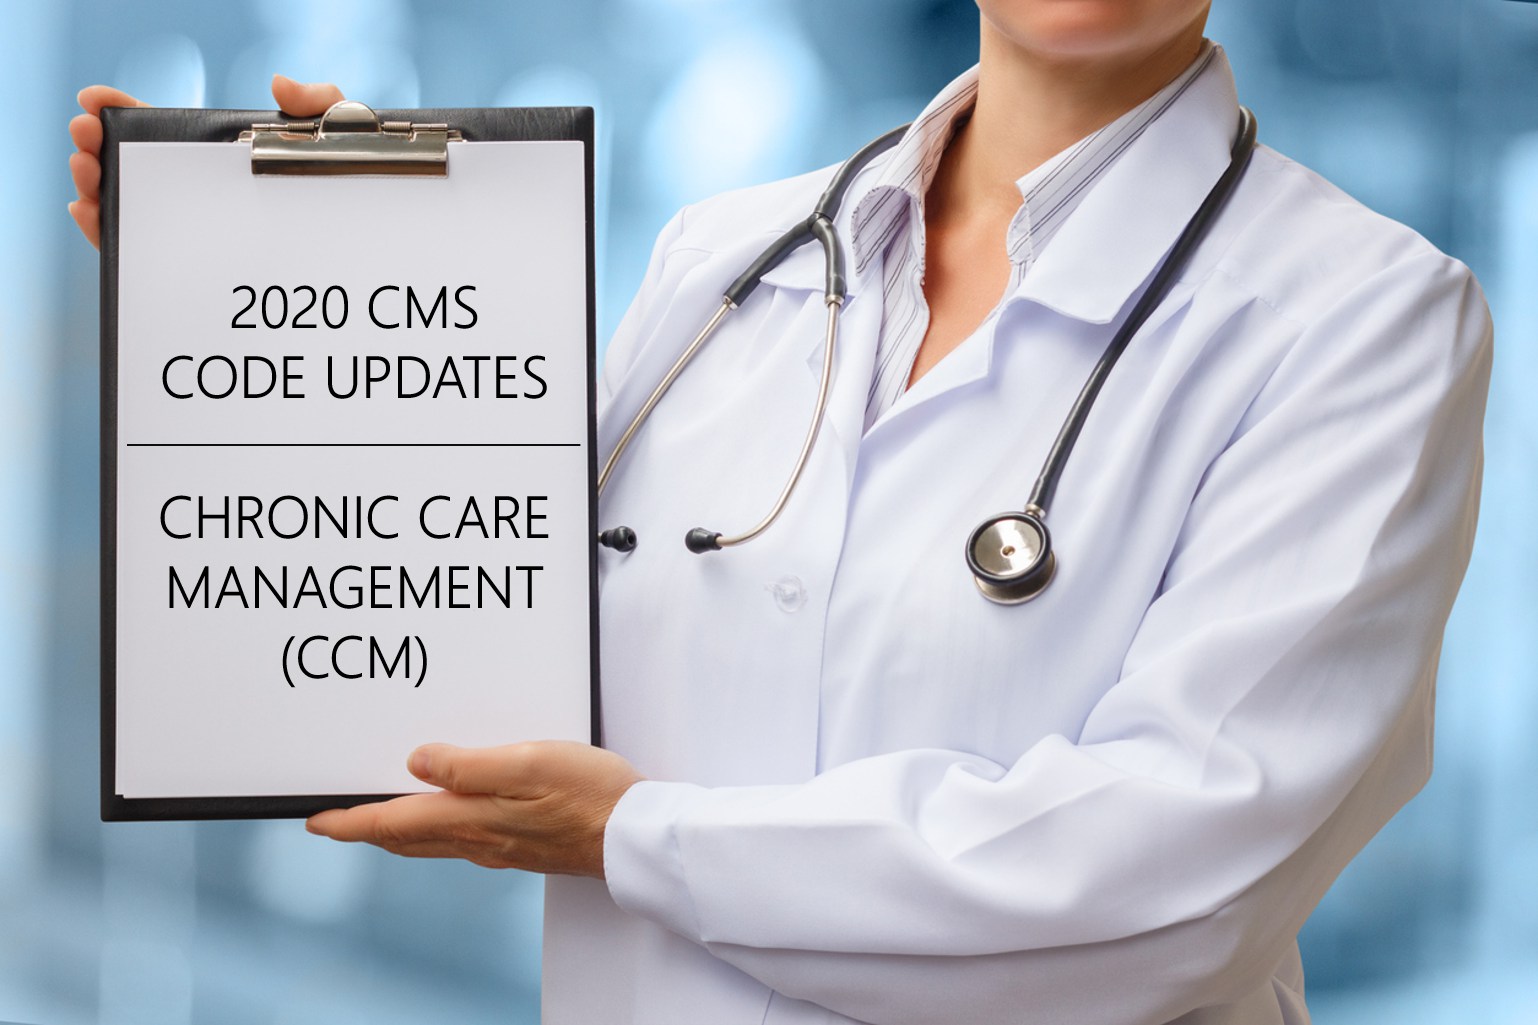 2020 CMS Code Updates for Chronic Care Management